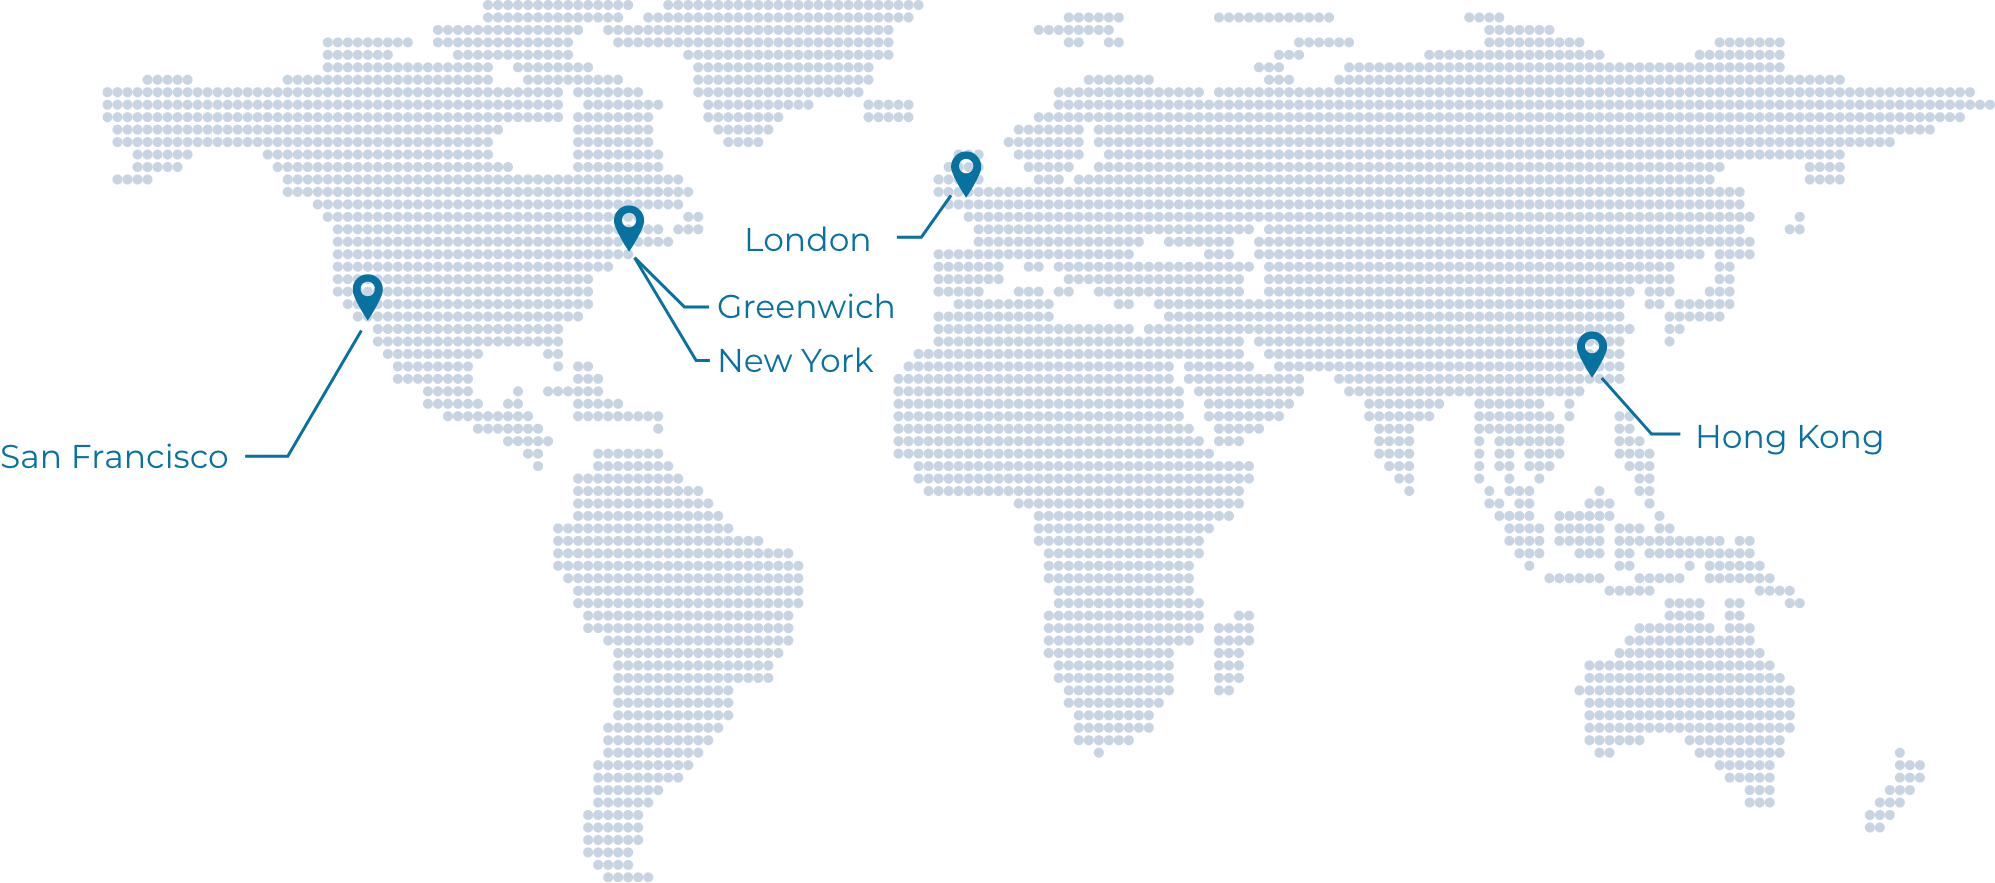 World map with markers showing the five Viking office locations in San Francisco, Greenwich, New York, London, and Hong Kong.